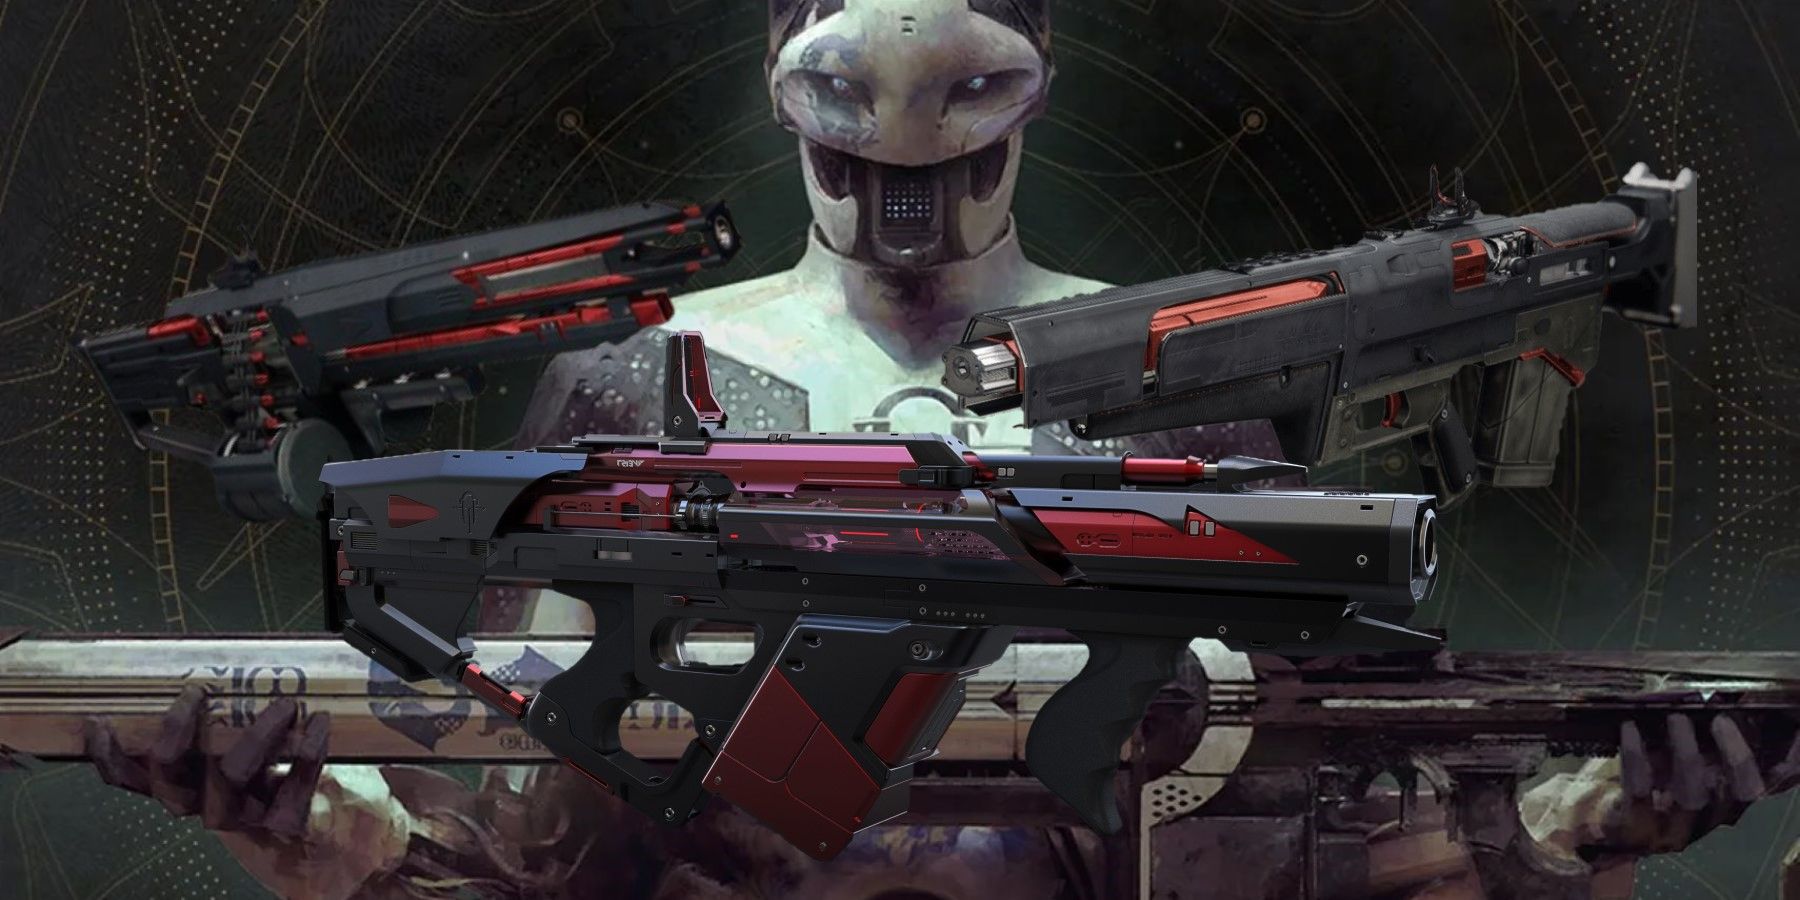 destiny 2 black armory weapons players want them to return gunsmith materials the witch queen crafting system